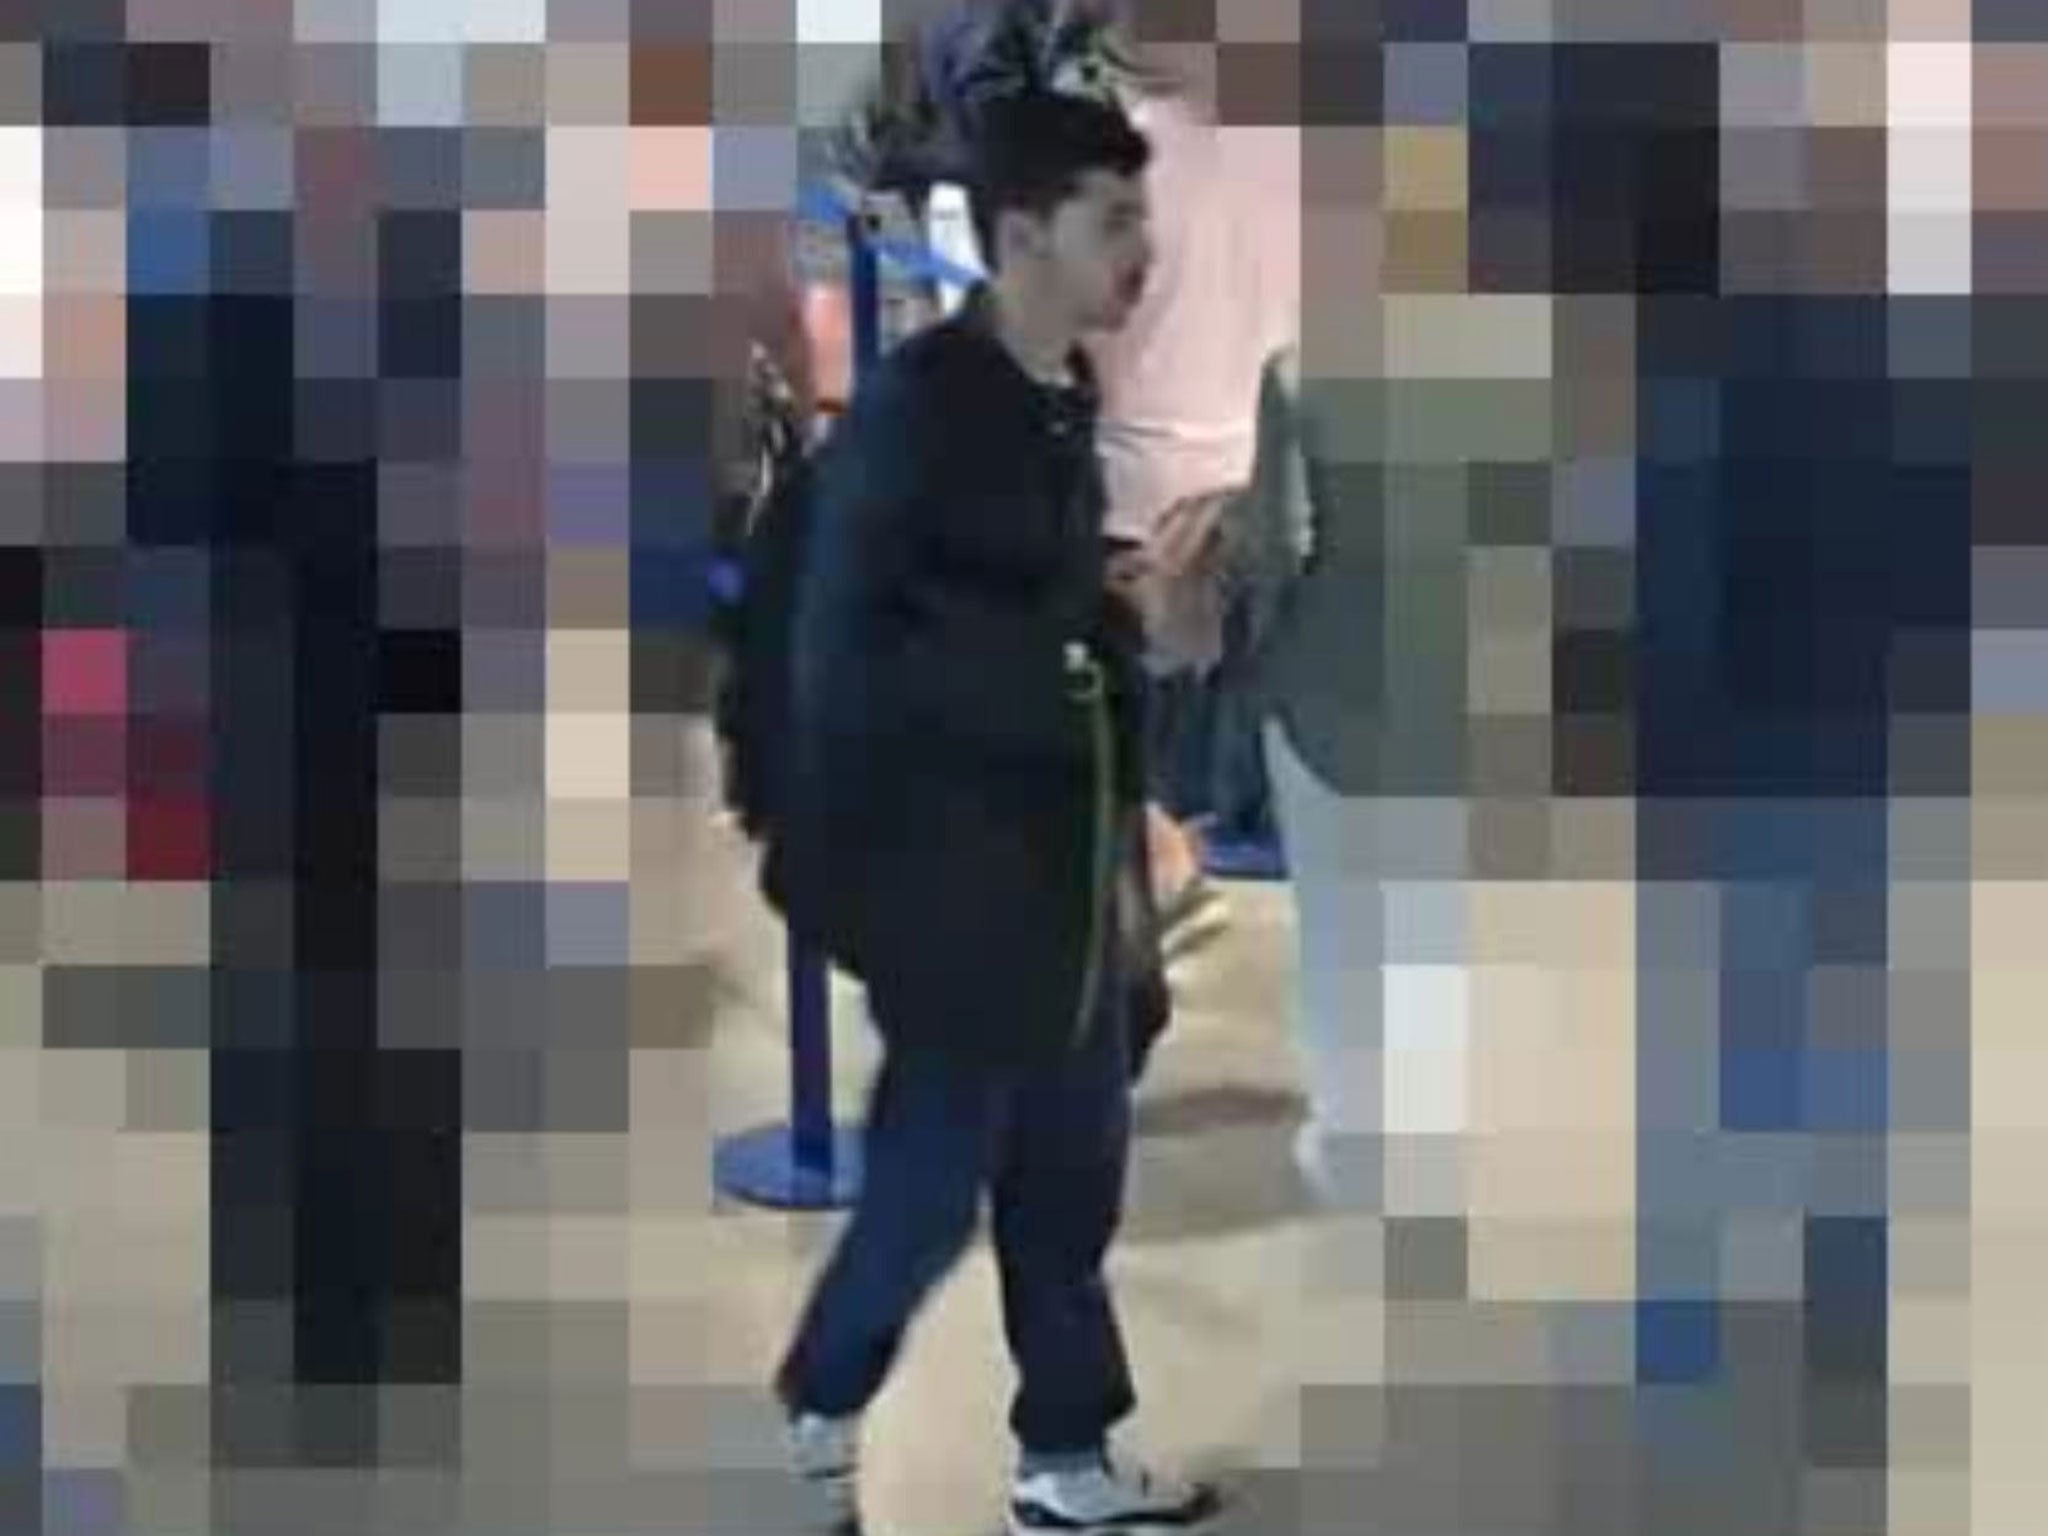 A CCTV image dated 18/5/2017 showing Salman Abedi before he carried out the Manchester attack